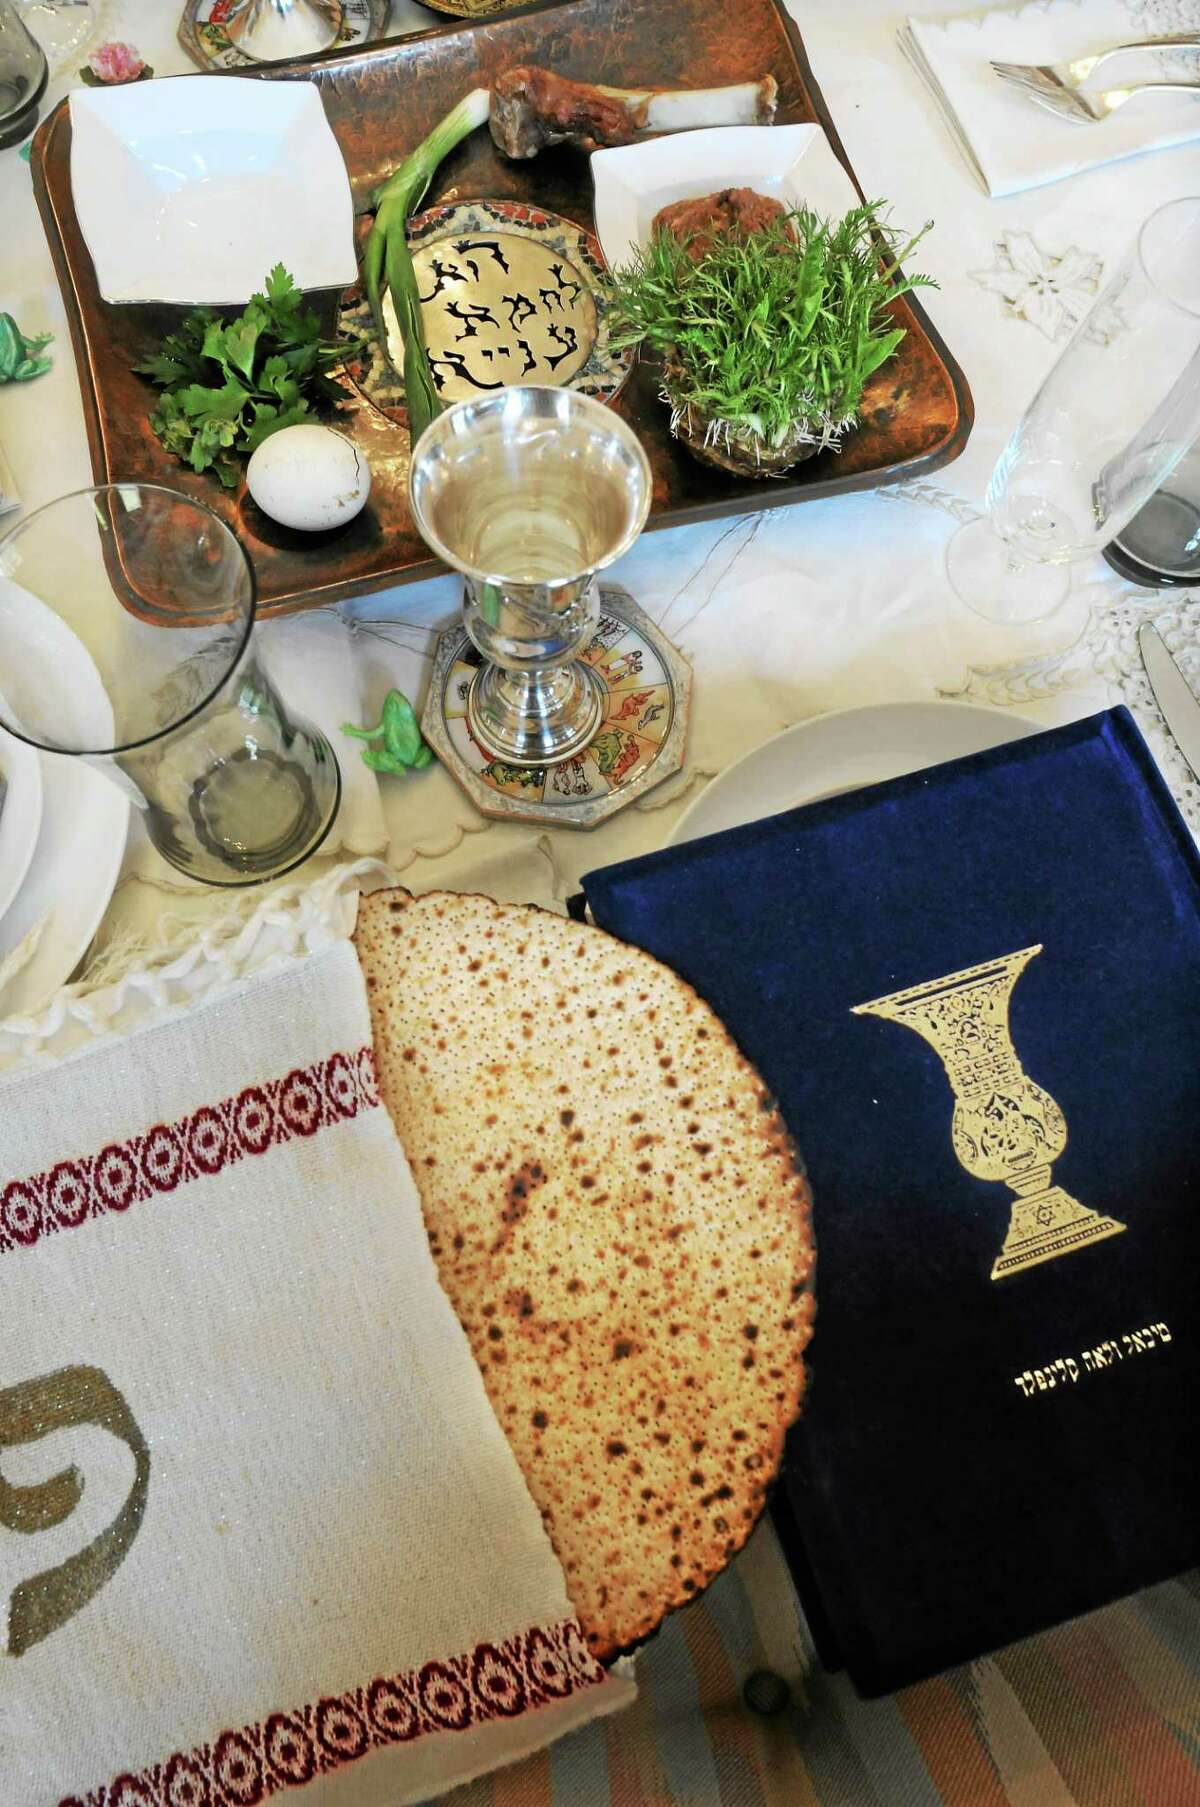 (Mara Lavitt ó New Haven Register) The seder table is all set at Caryl Kligfeld's home in Woodbridge. The seder plate and matzoh.